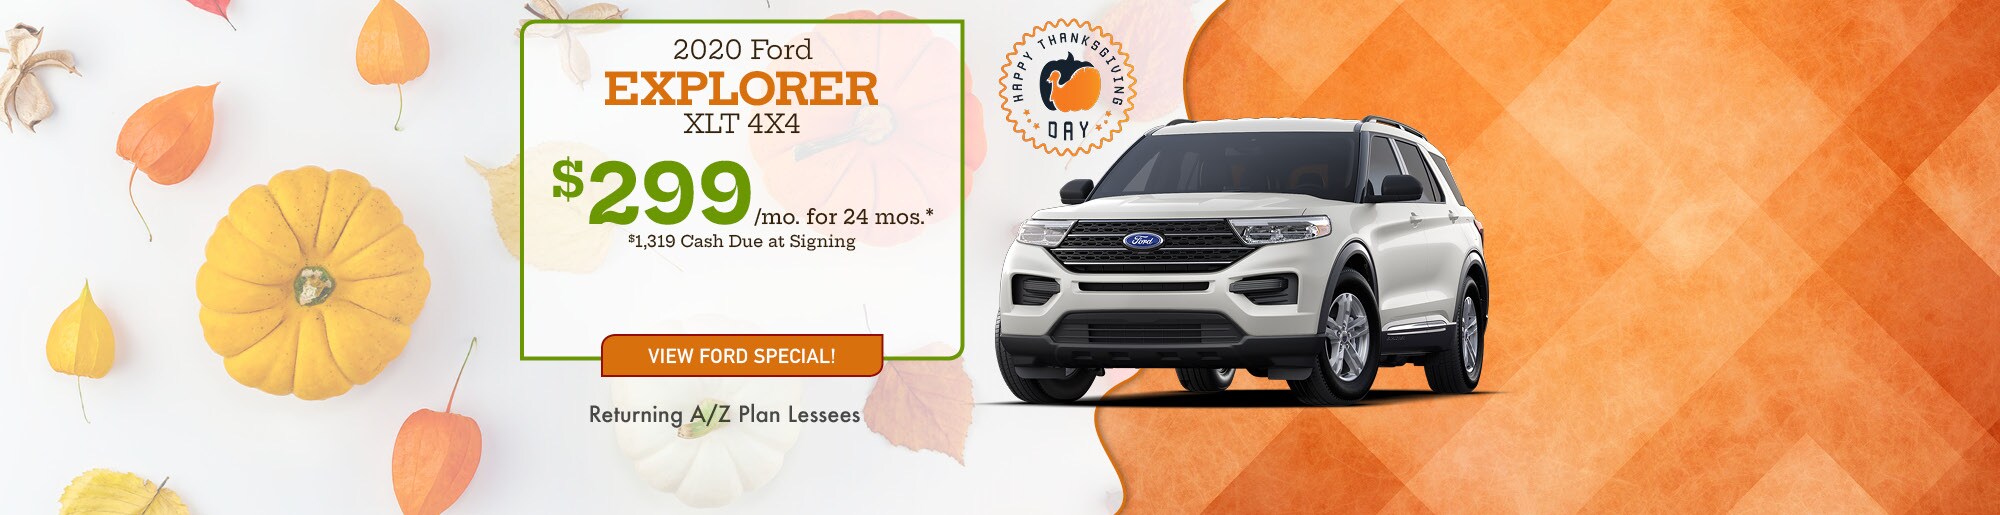 New 2019 - 2020 Ford & Used Car Dealer in Howell MI | Near Fowlerville